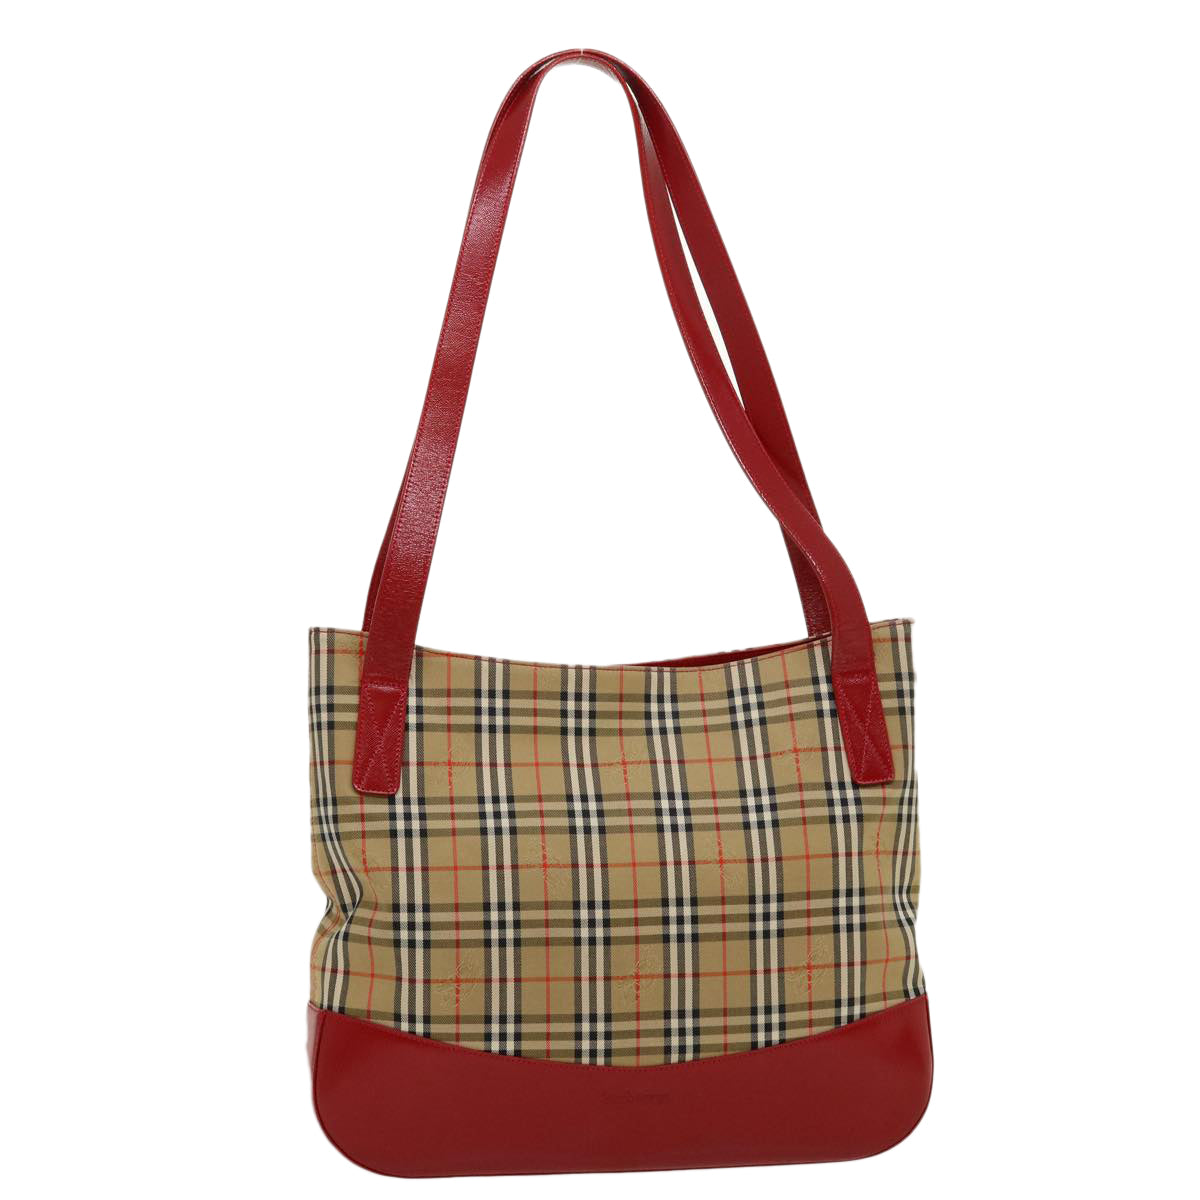 Burberrys Nova Check Tote Bag Canvas Leather Beige Red Auth rd2124